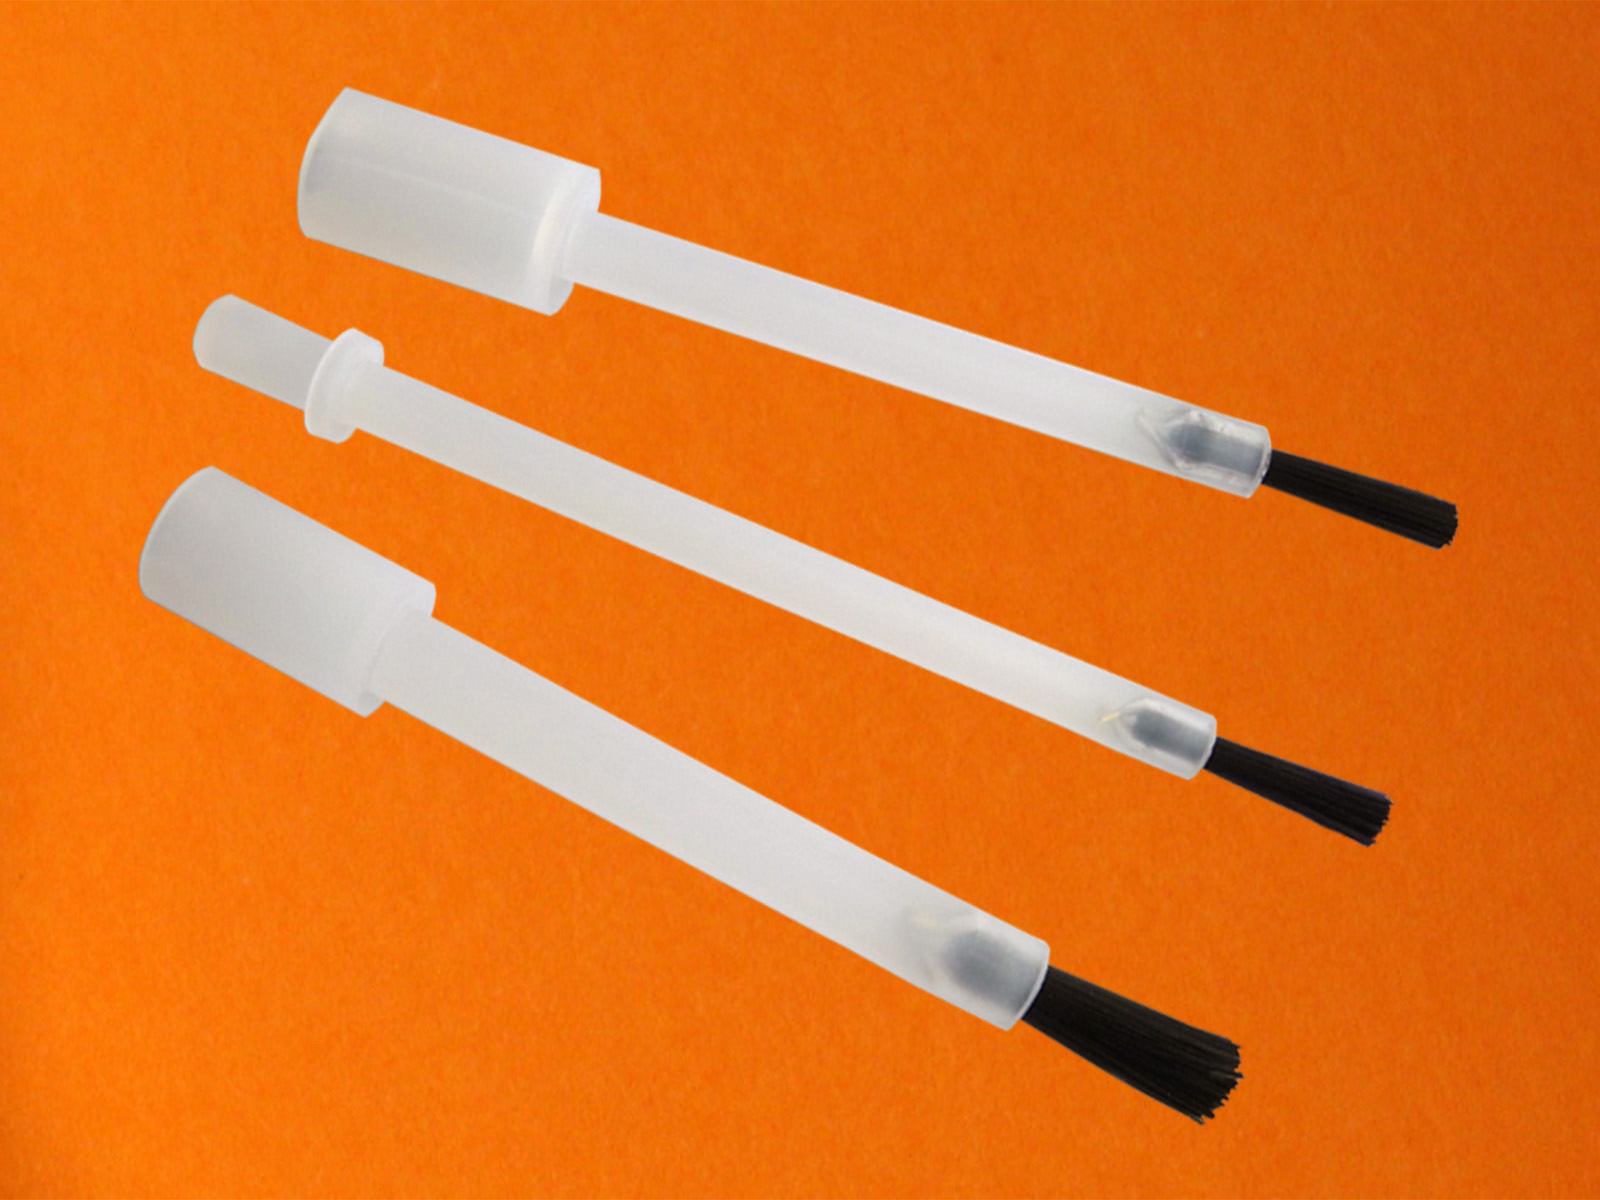 Brush with a standard fitting for pharmaceutical screw caps.